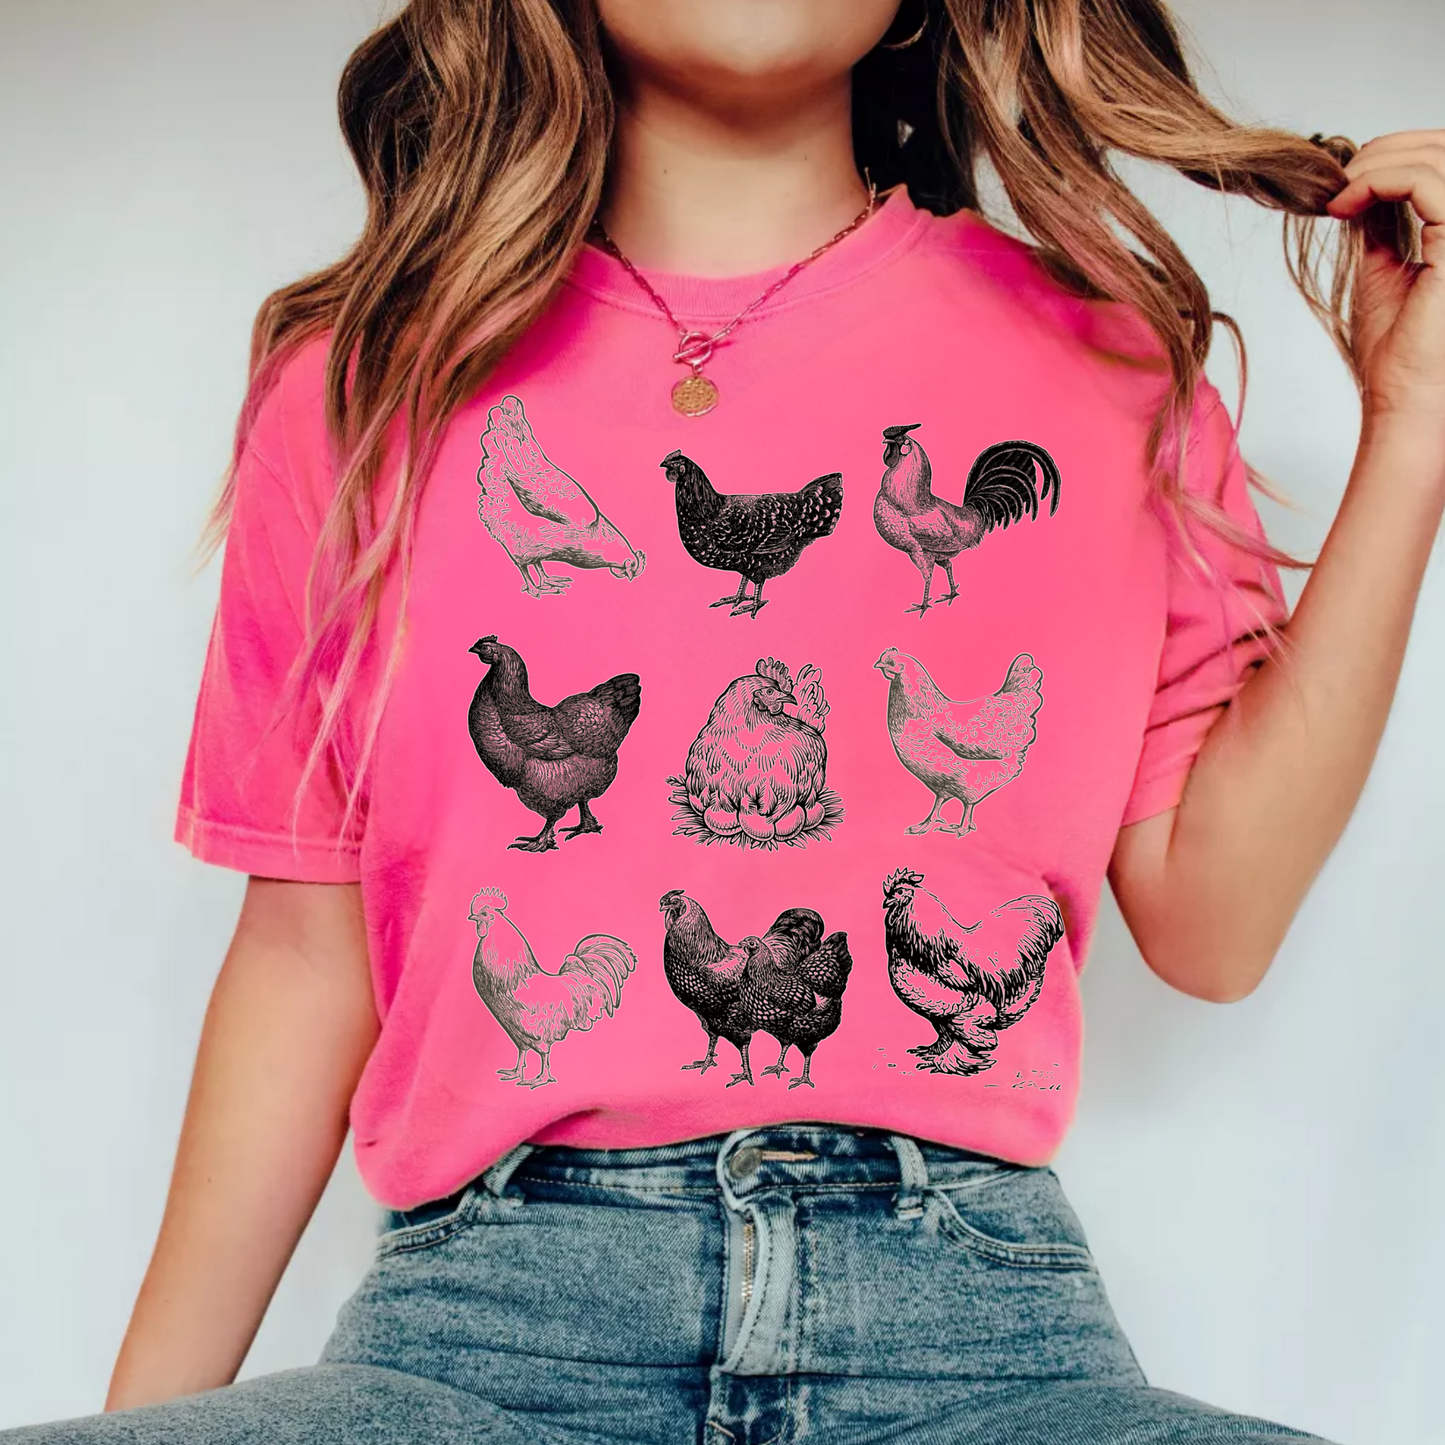 (shirt not included) Chickens - Matte Clear Film Transfer